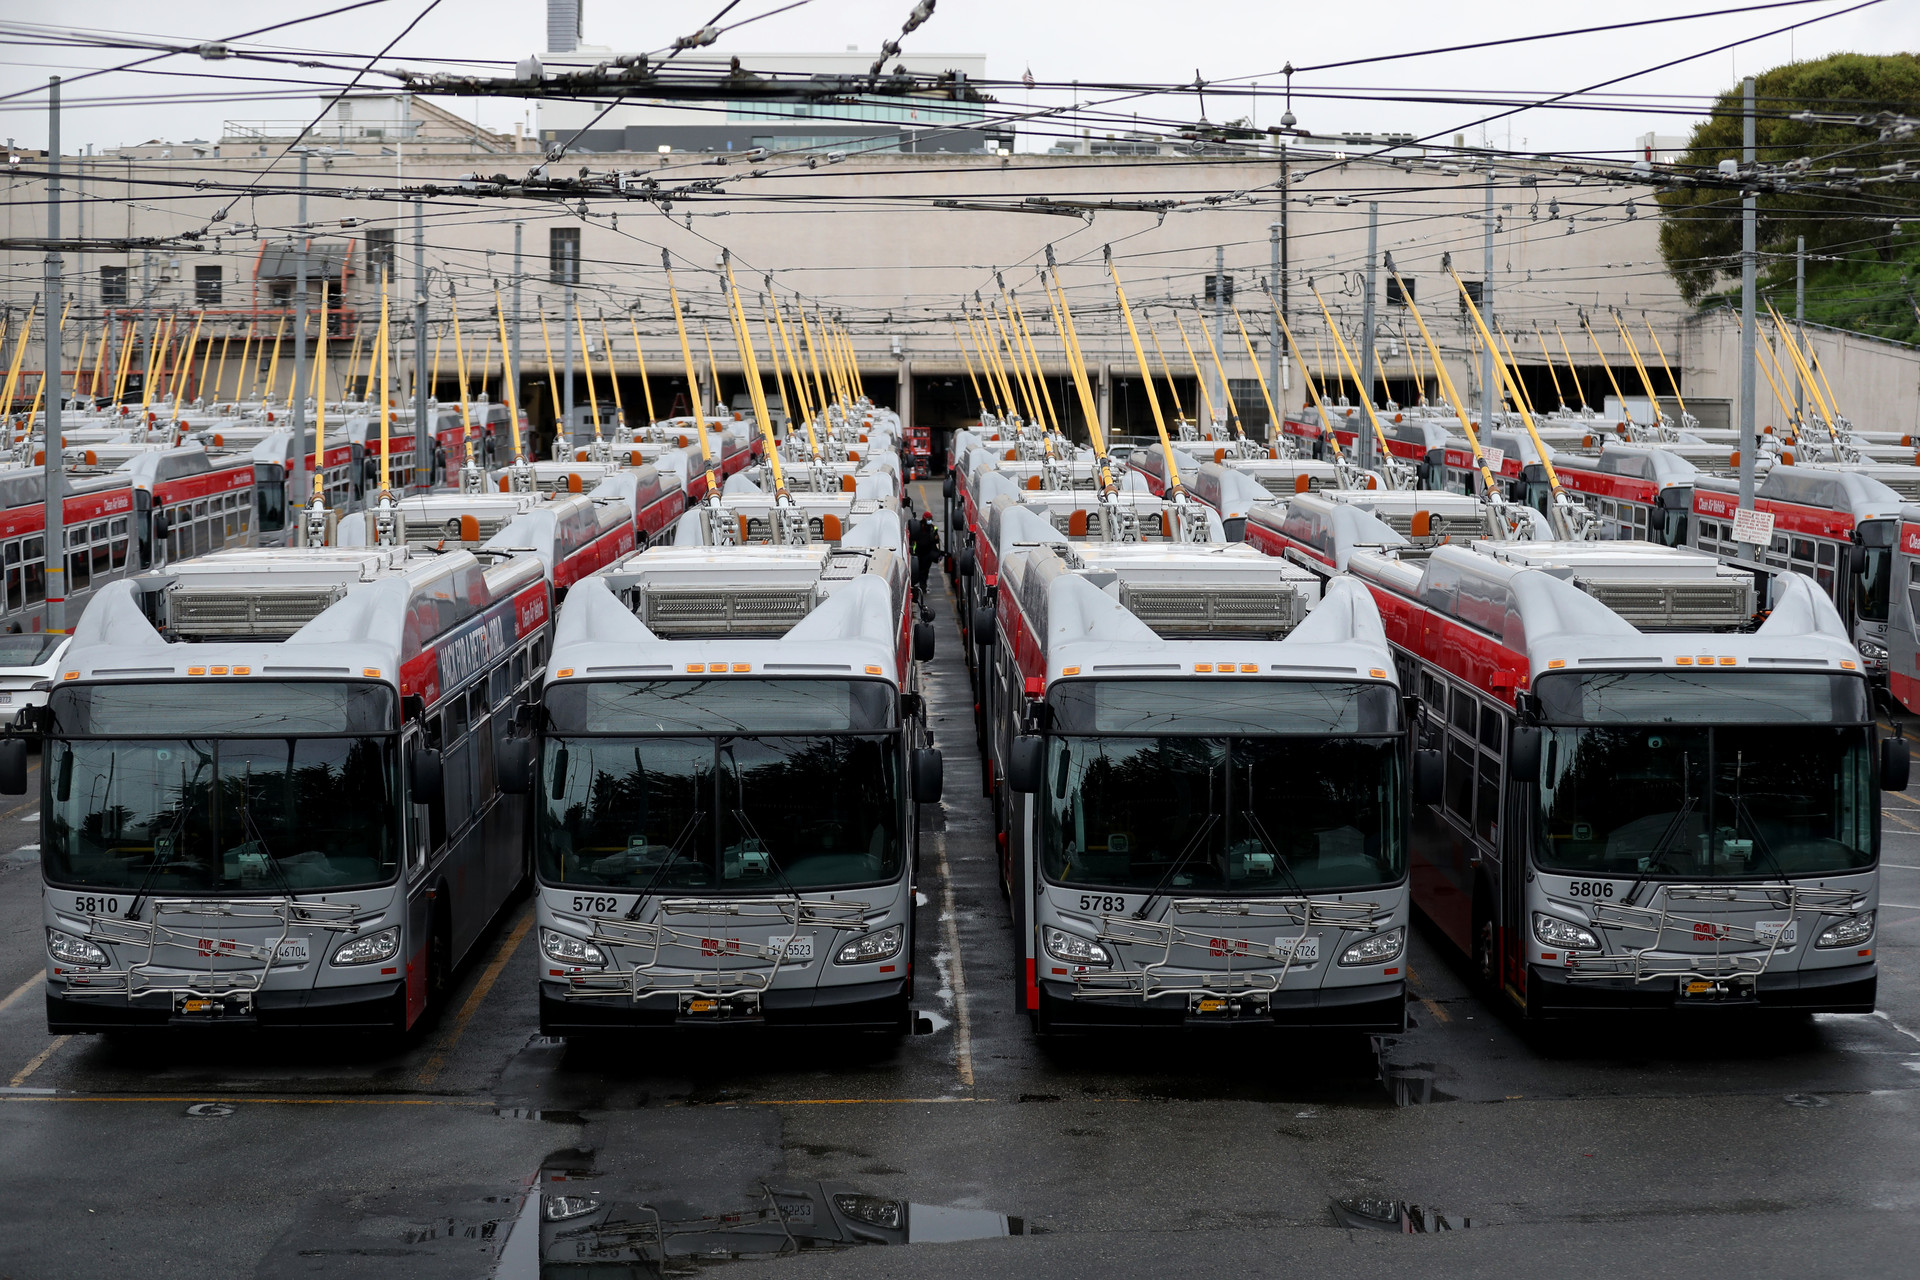 San Francisco MUNI buses sit parked at an SF Municipal Railway yard during the coronavirus (COVID-19) pandemic on April 06, 2020 in San Francisco, California. The San Francisco Municipal Transportation Agency (SFMTA) announced that they are cutting service to a majority of their 89 bus lines in the City of San Francisco as ridership plummets due to the coronavirus shelter in place. 